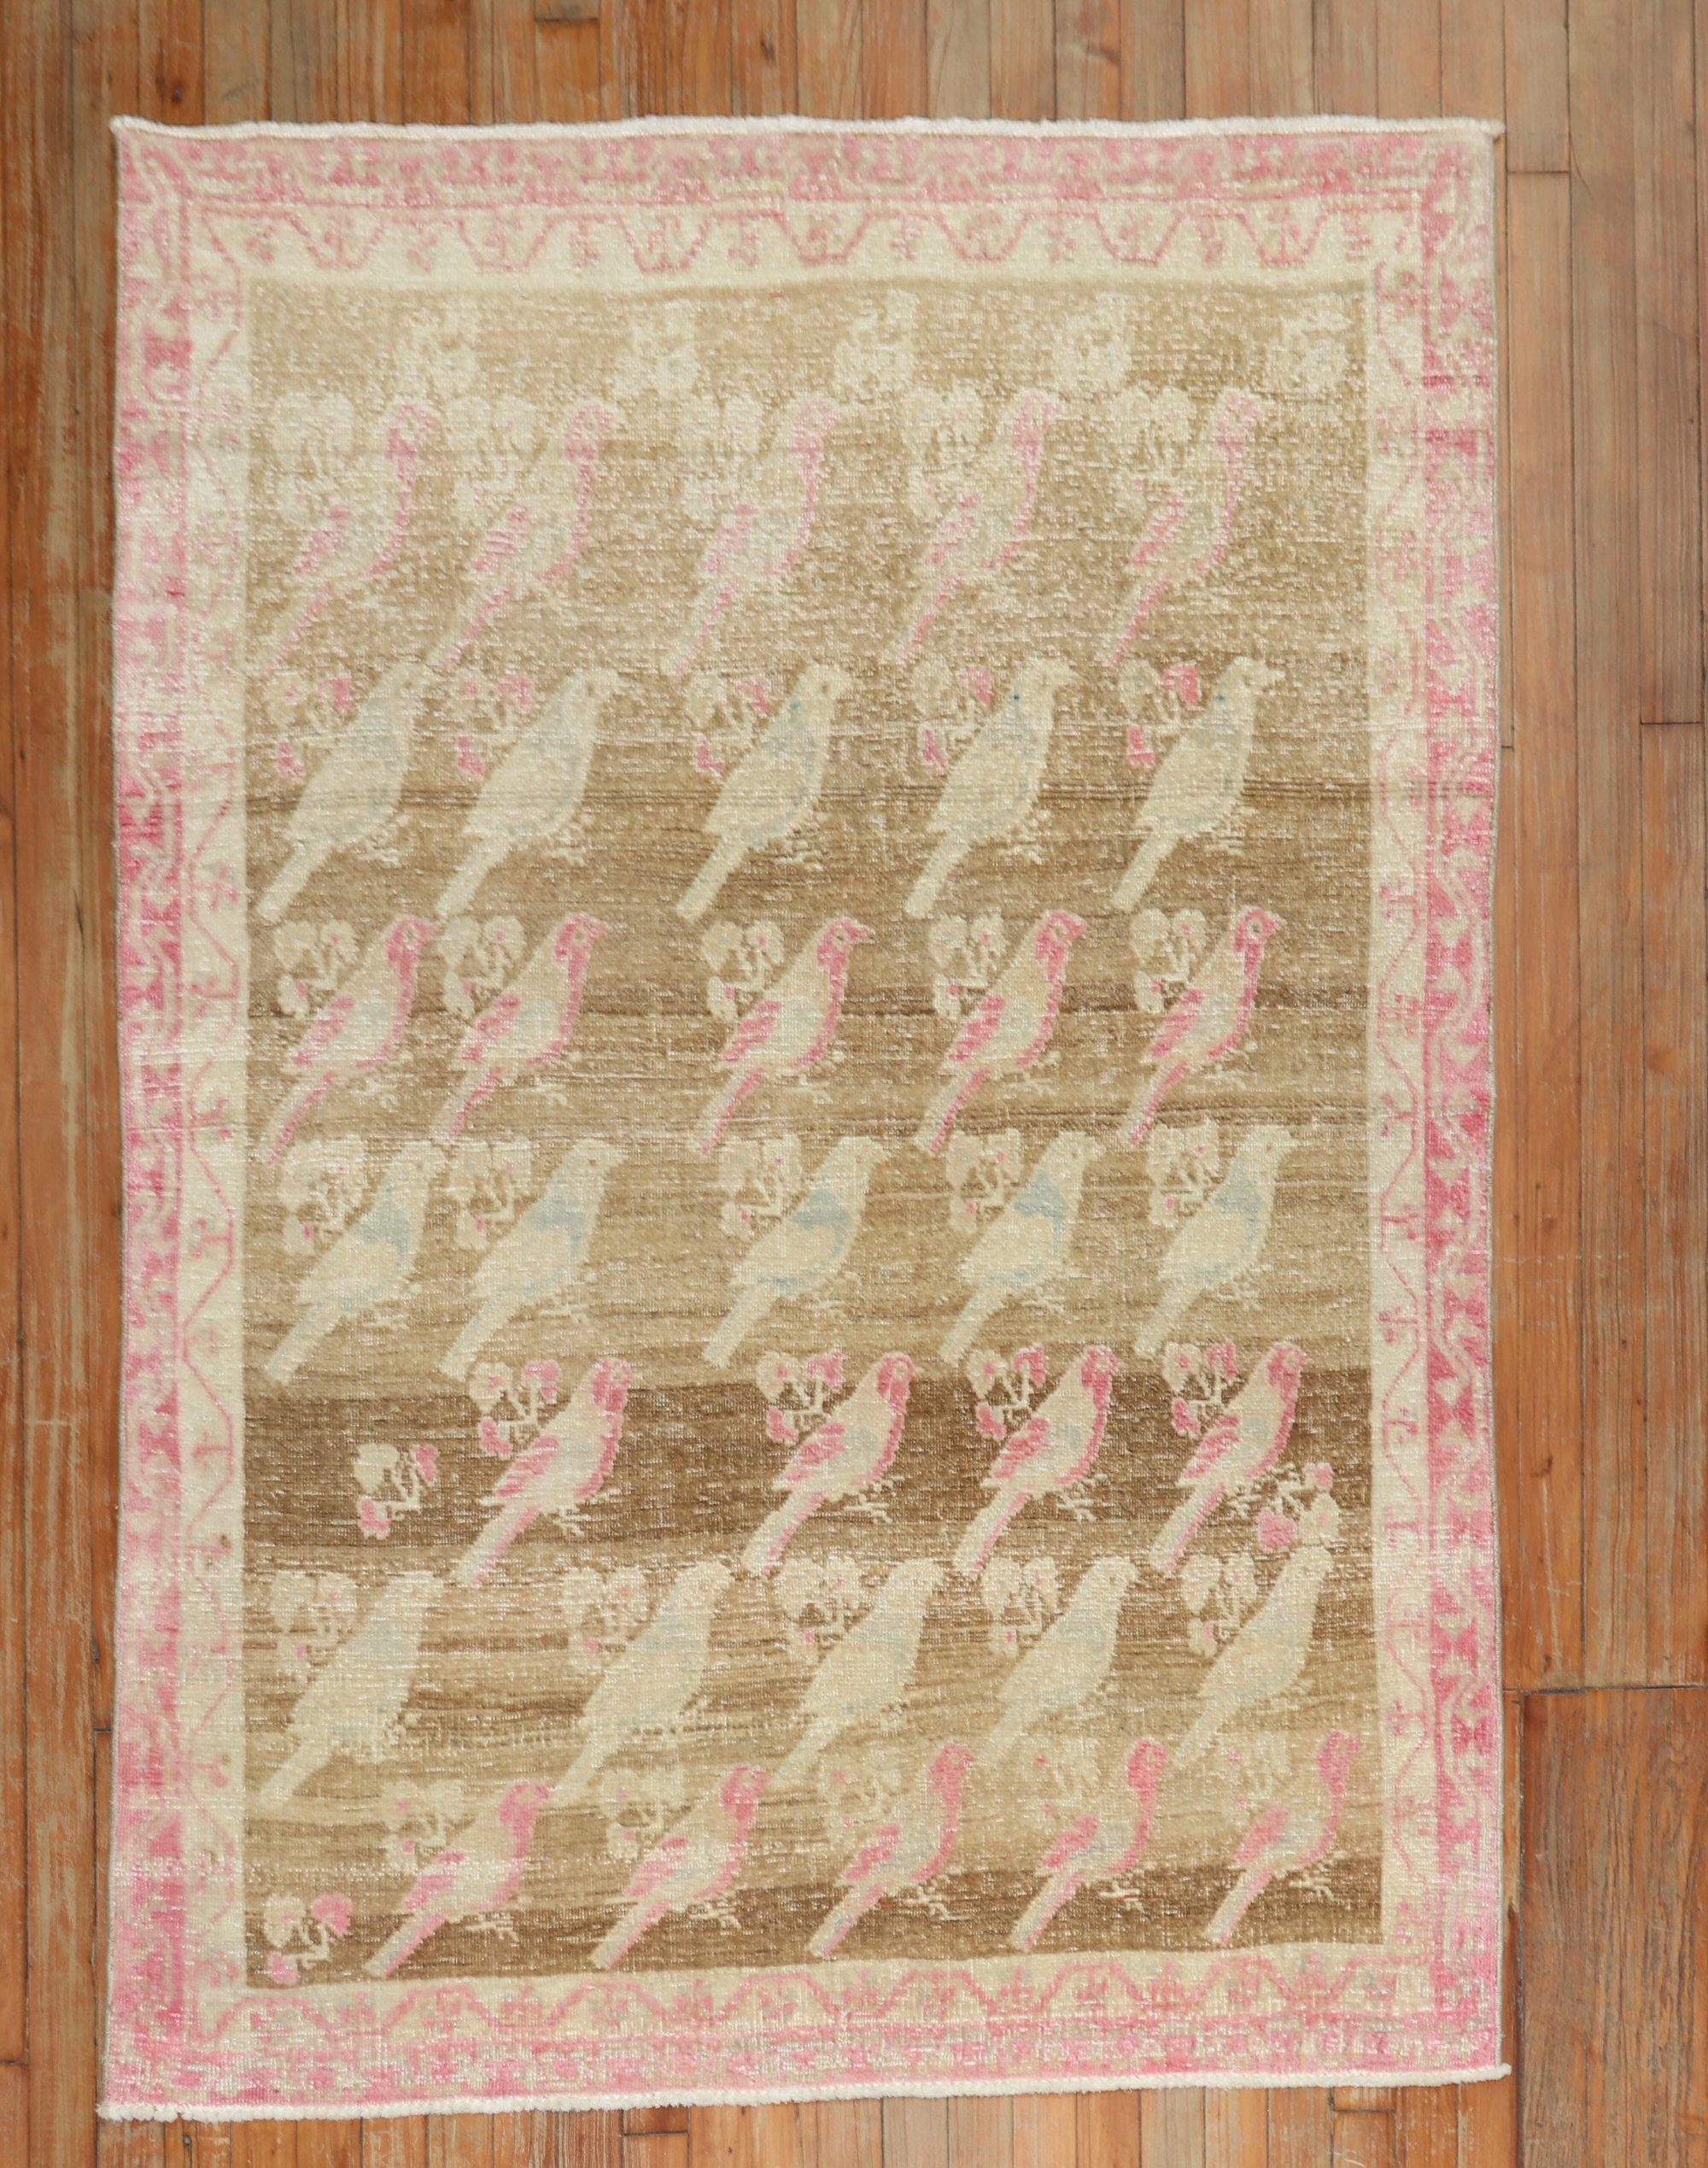 A mid-20th-century worn Persian Gabbeh rug with an all-over pigeon design on a brown field, primary accents in pink

Measures: 4' x 5'11''.